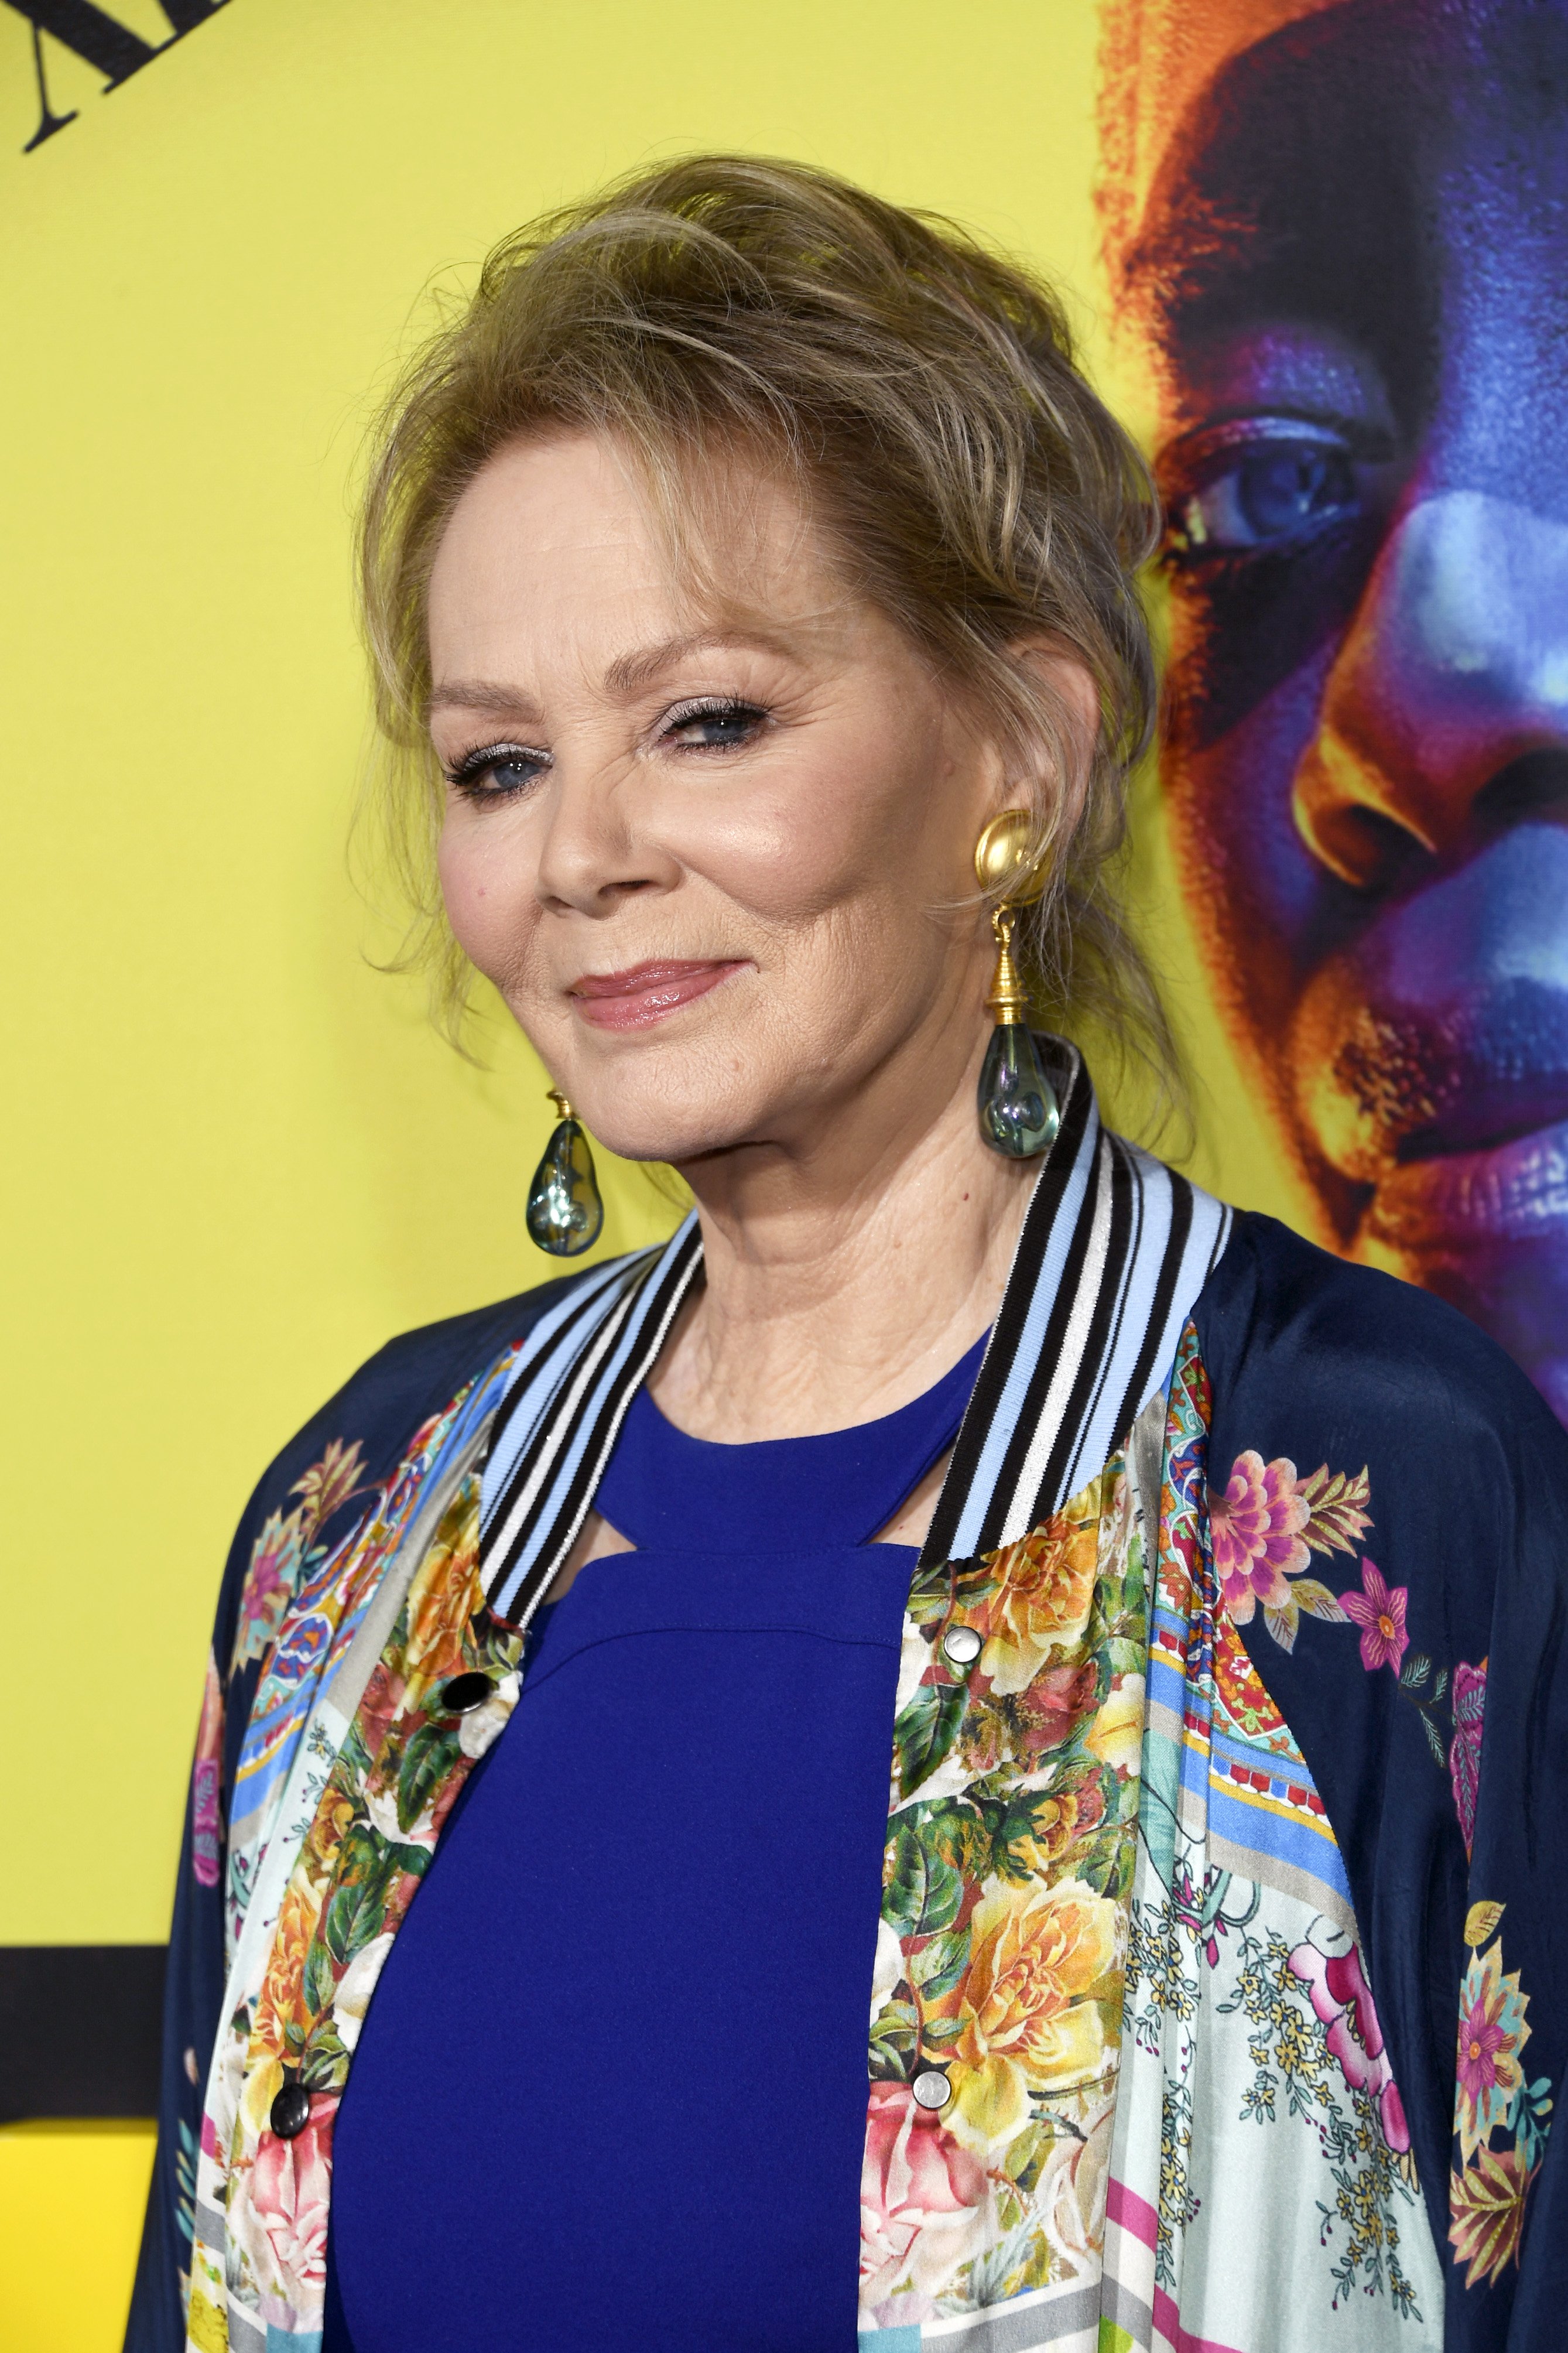 Jean Smart of 'Designing Women' Fame Has Been Married for 32 Years